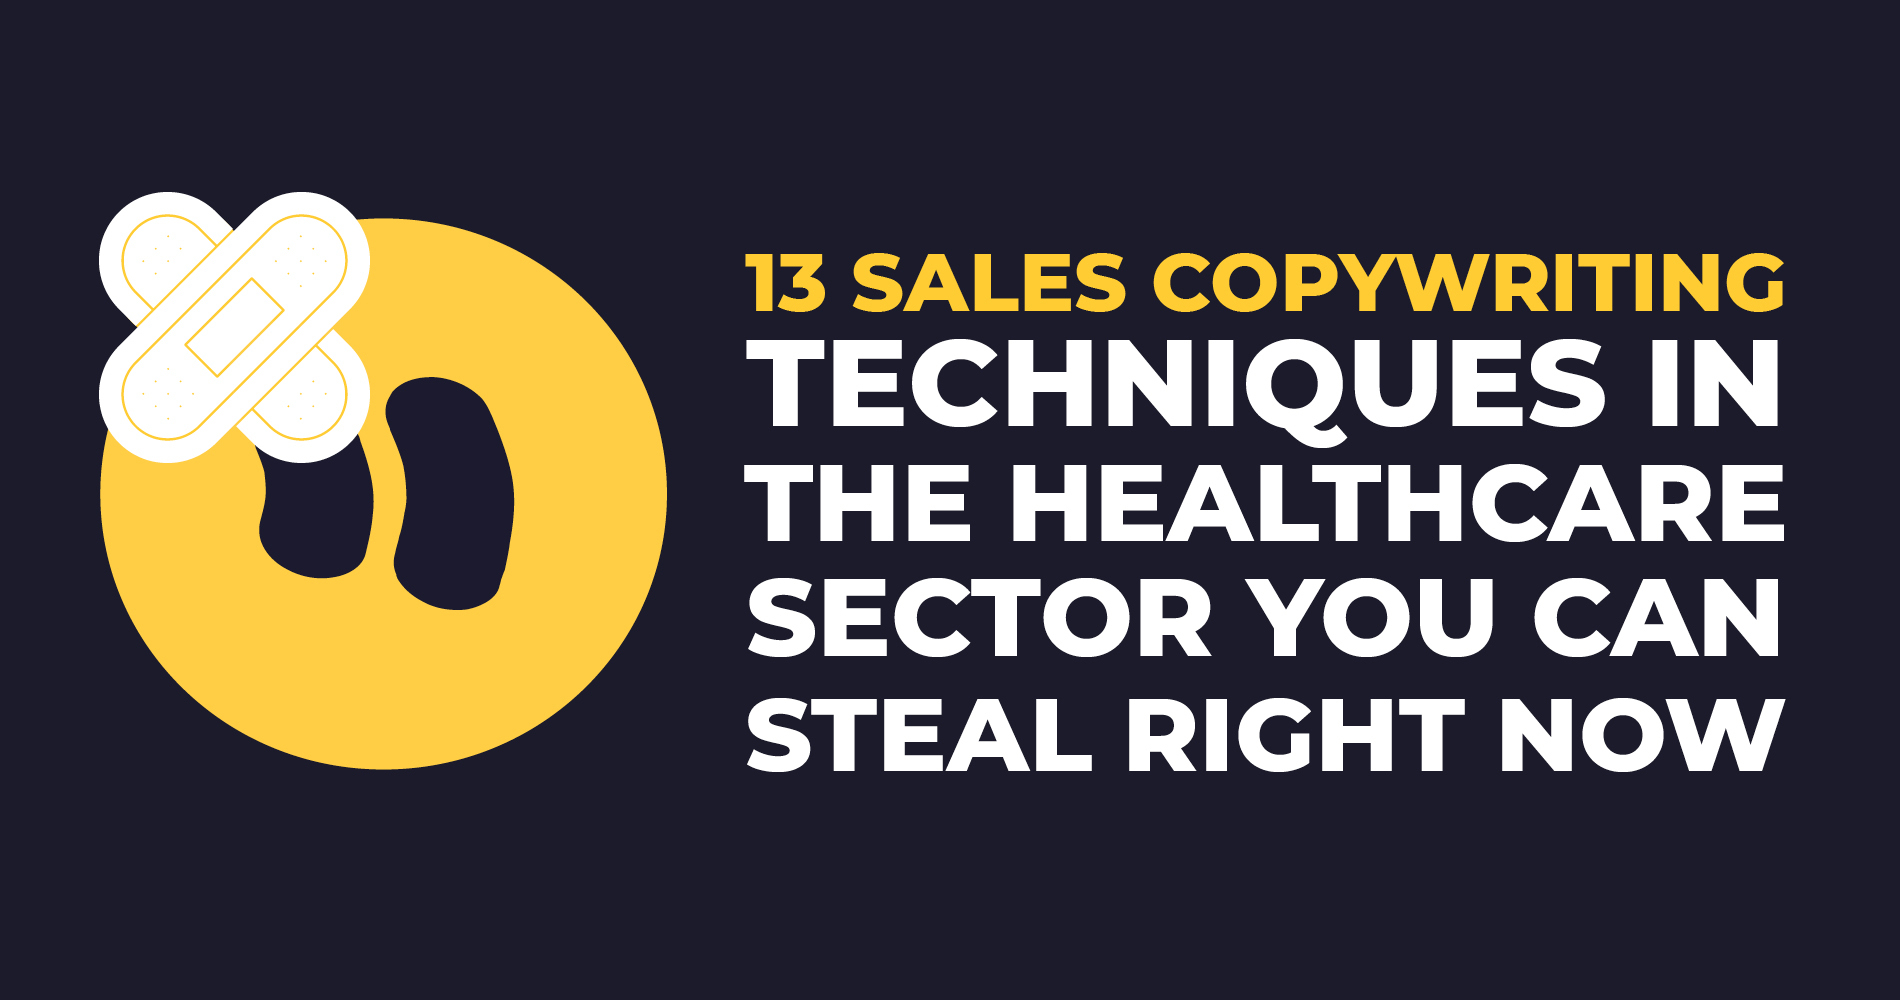 13 sales copywriting techniques in the healthcare sector you can steal right now